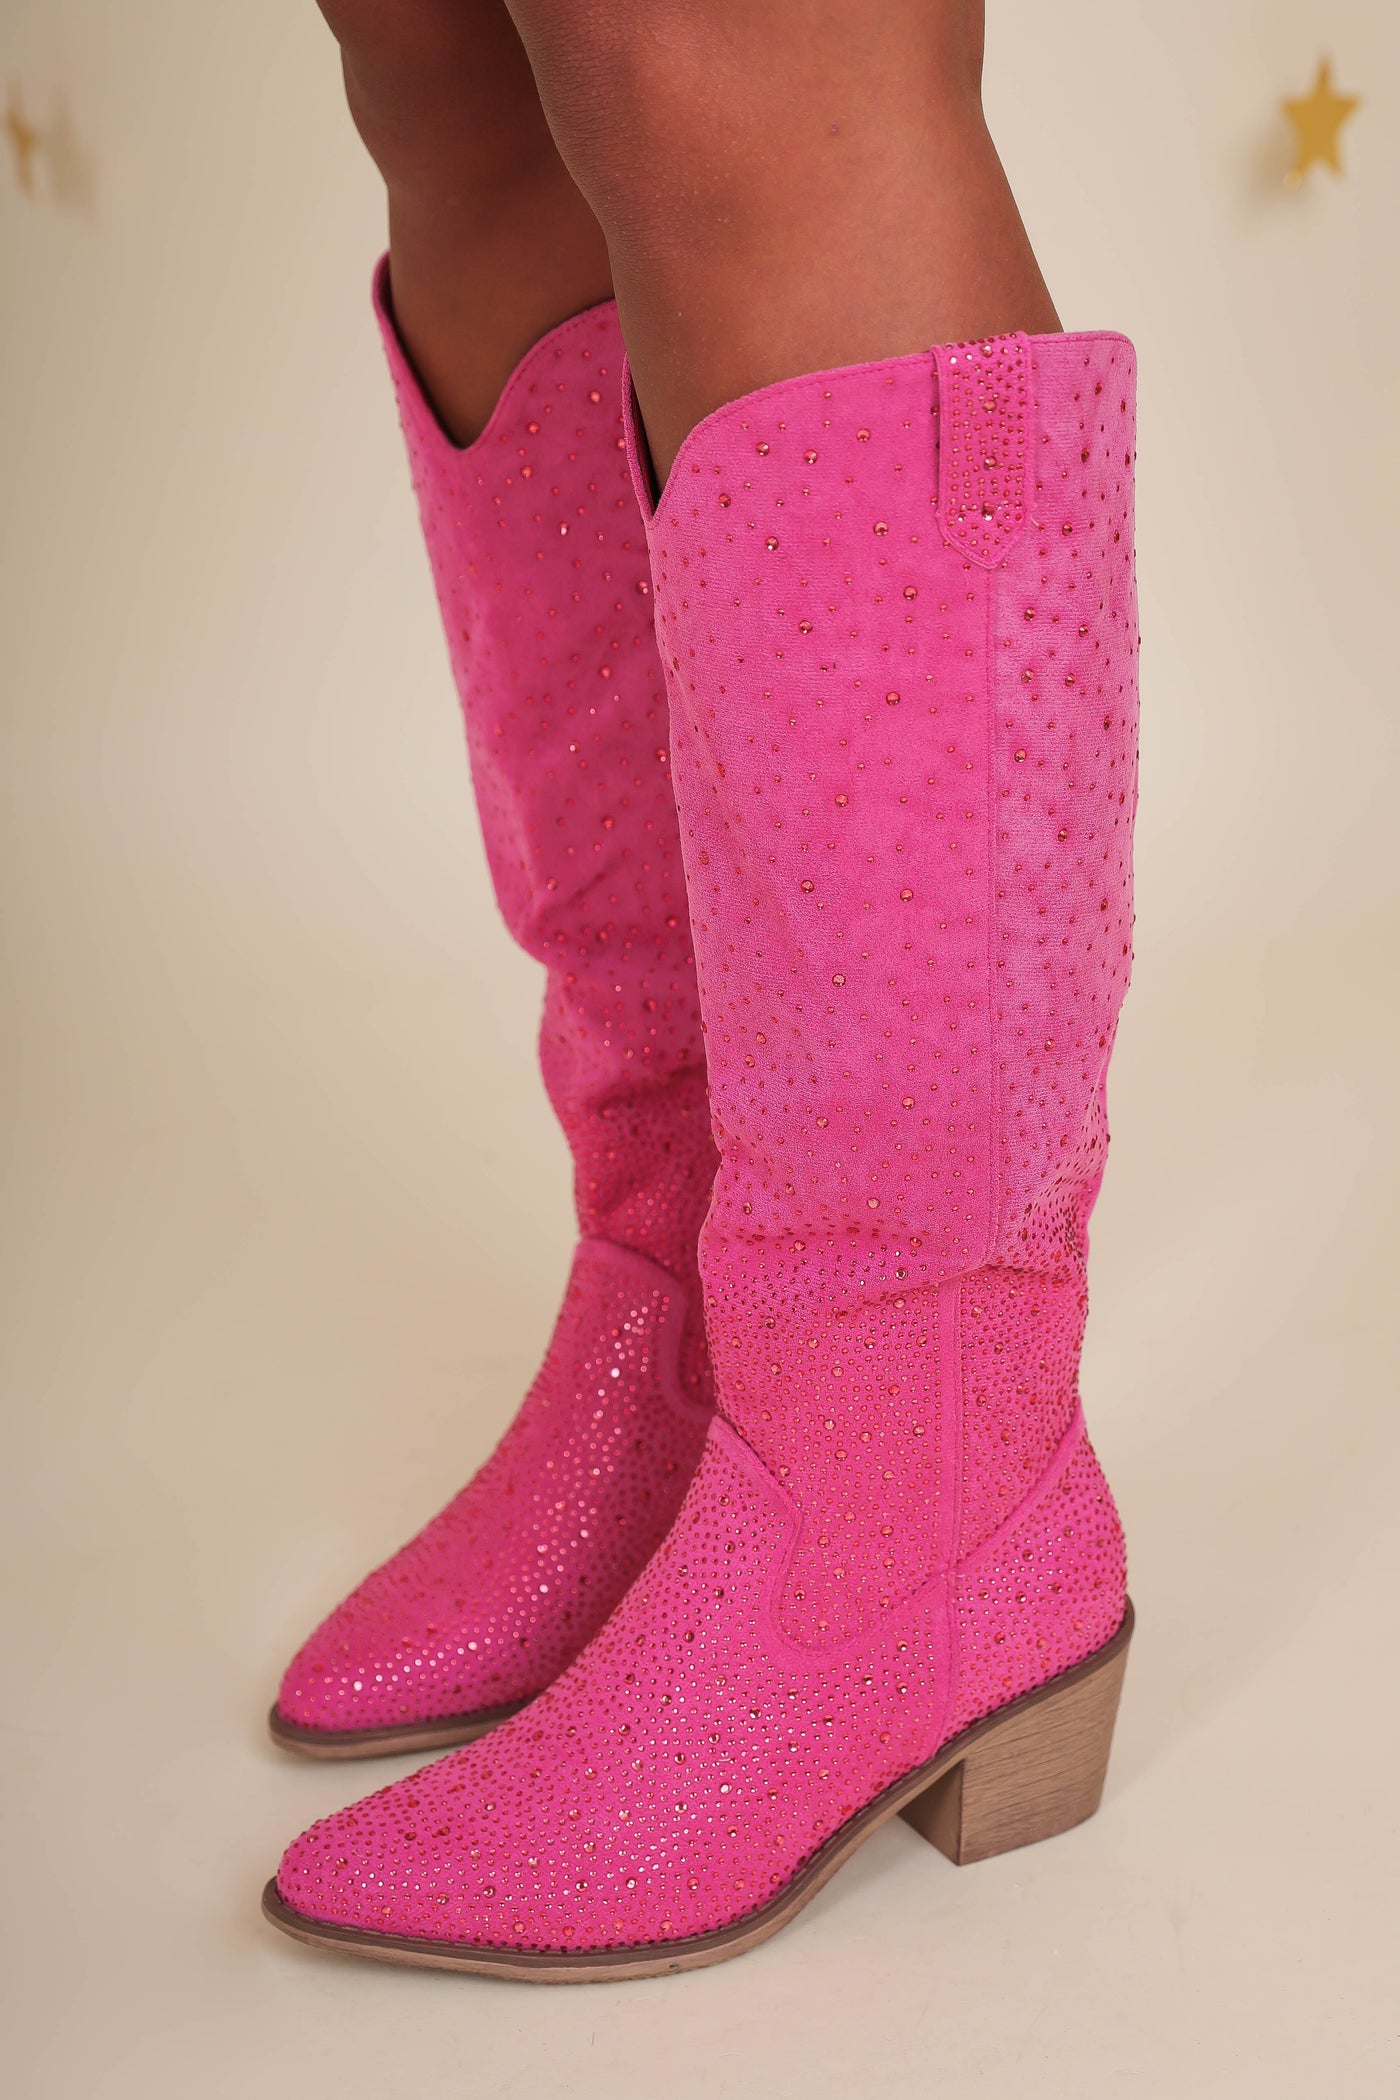 Hot Pink Tall Western Boots- Pink Rhinestone Boots- Pierre Dumas Hot Pink Boots